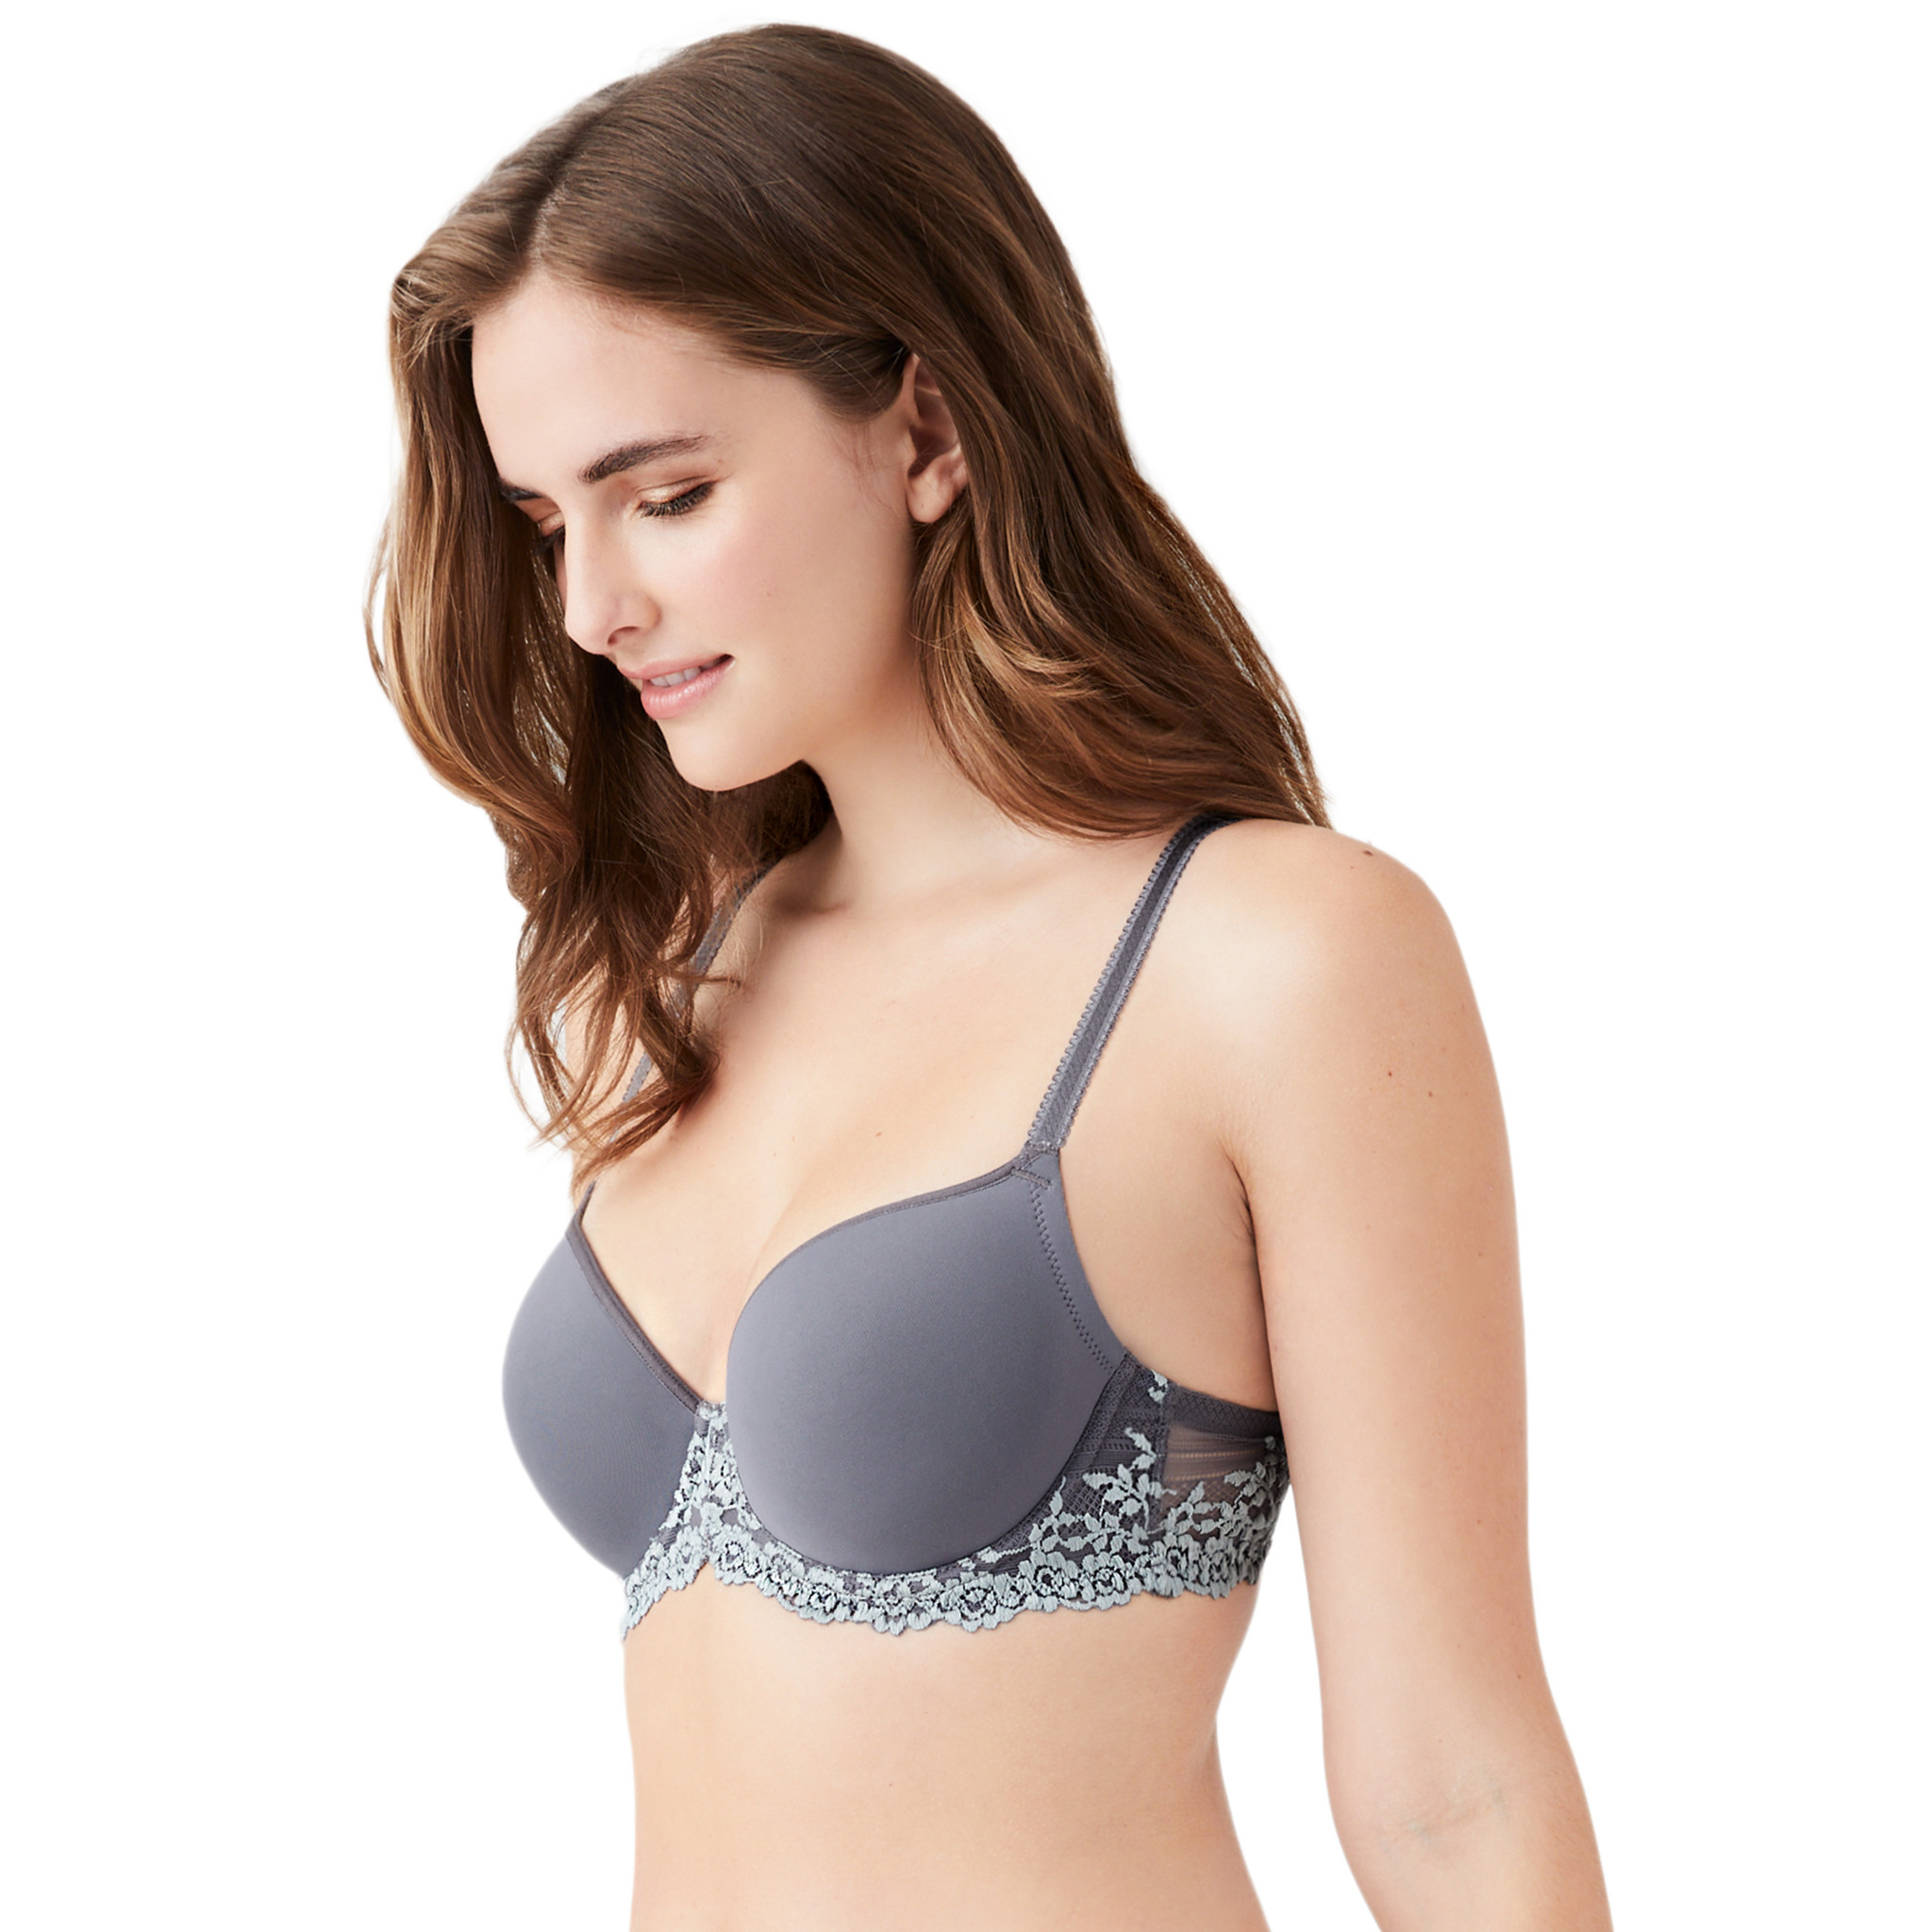 Embrace Lace T-shirt bra in Quiet Shade